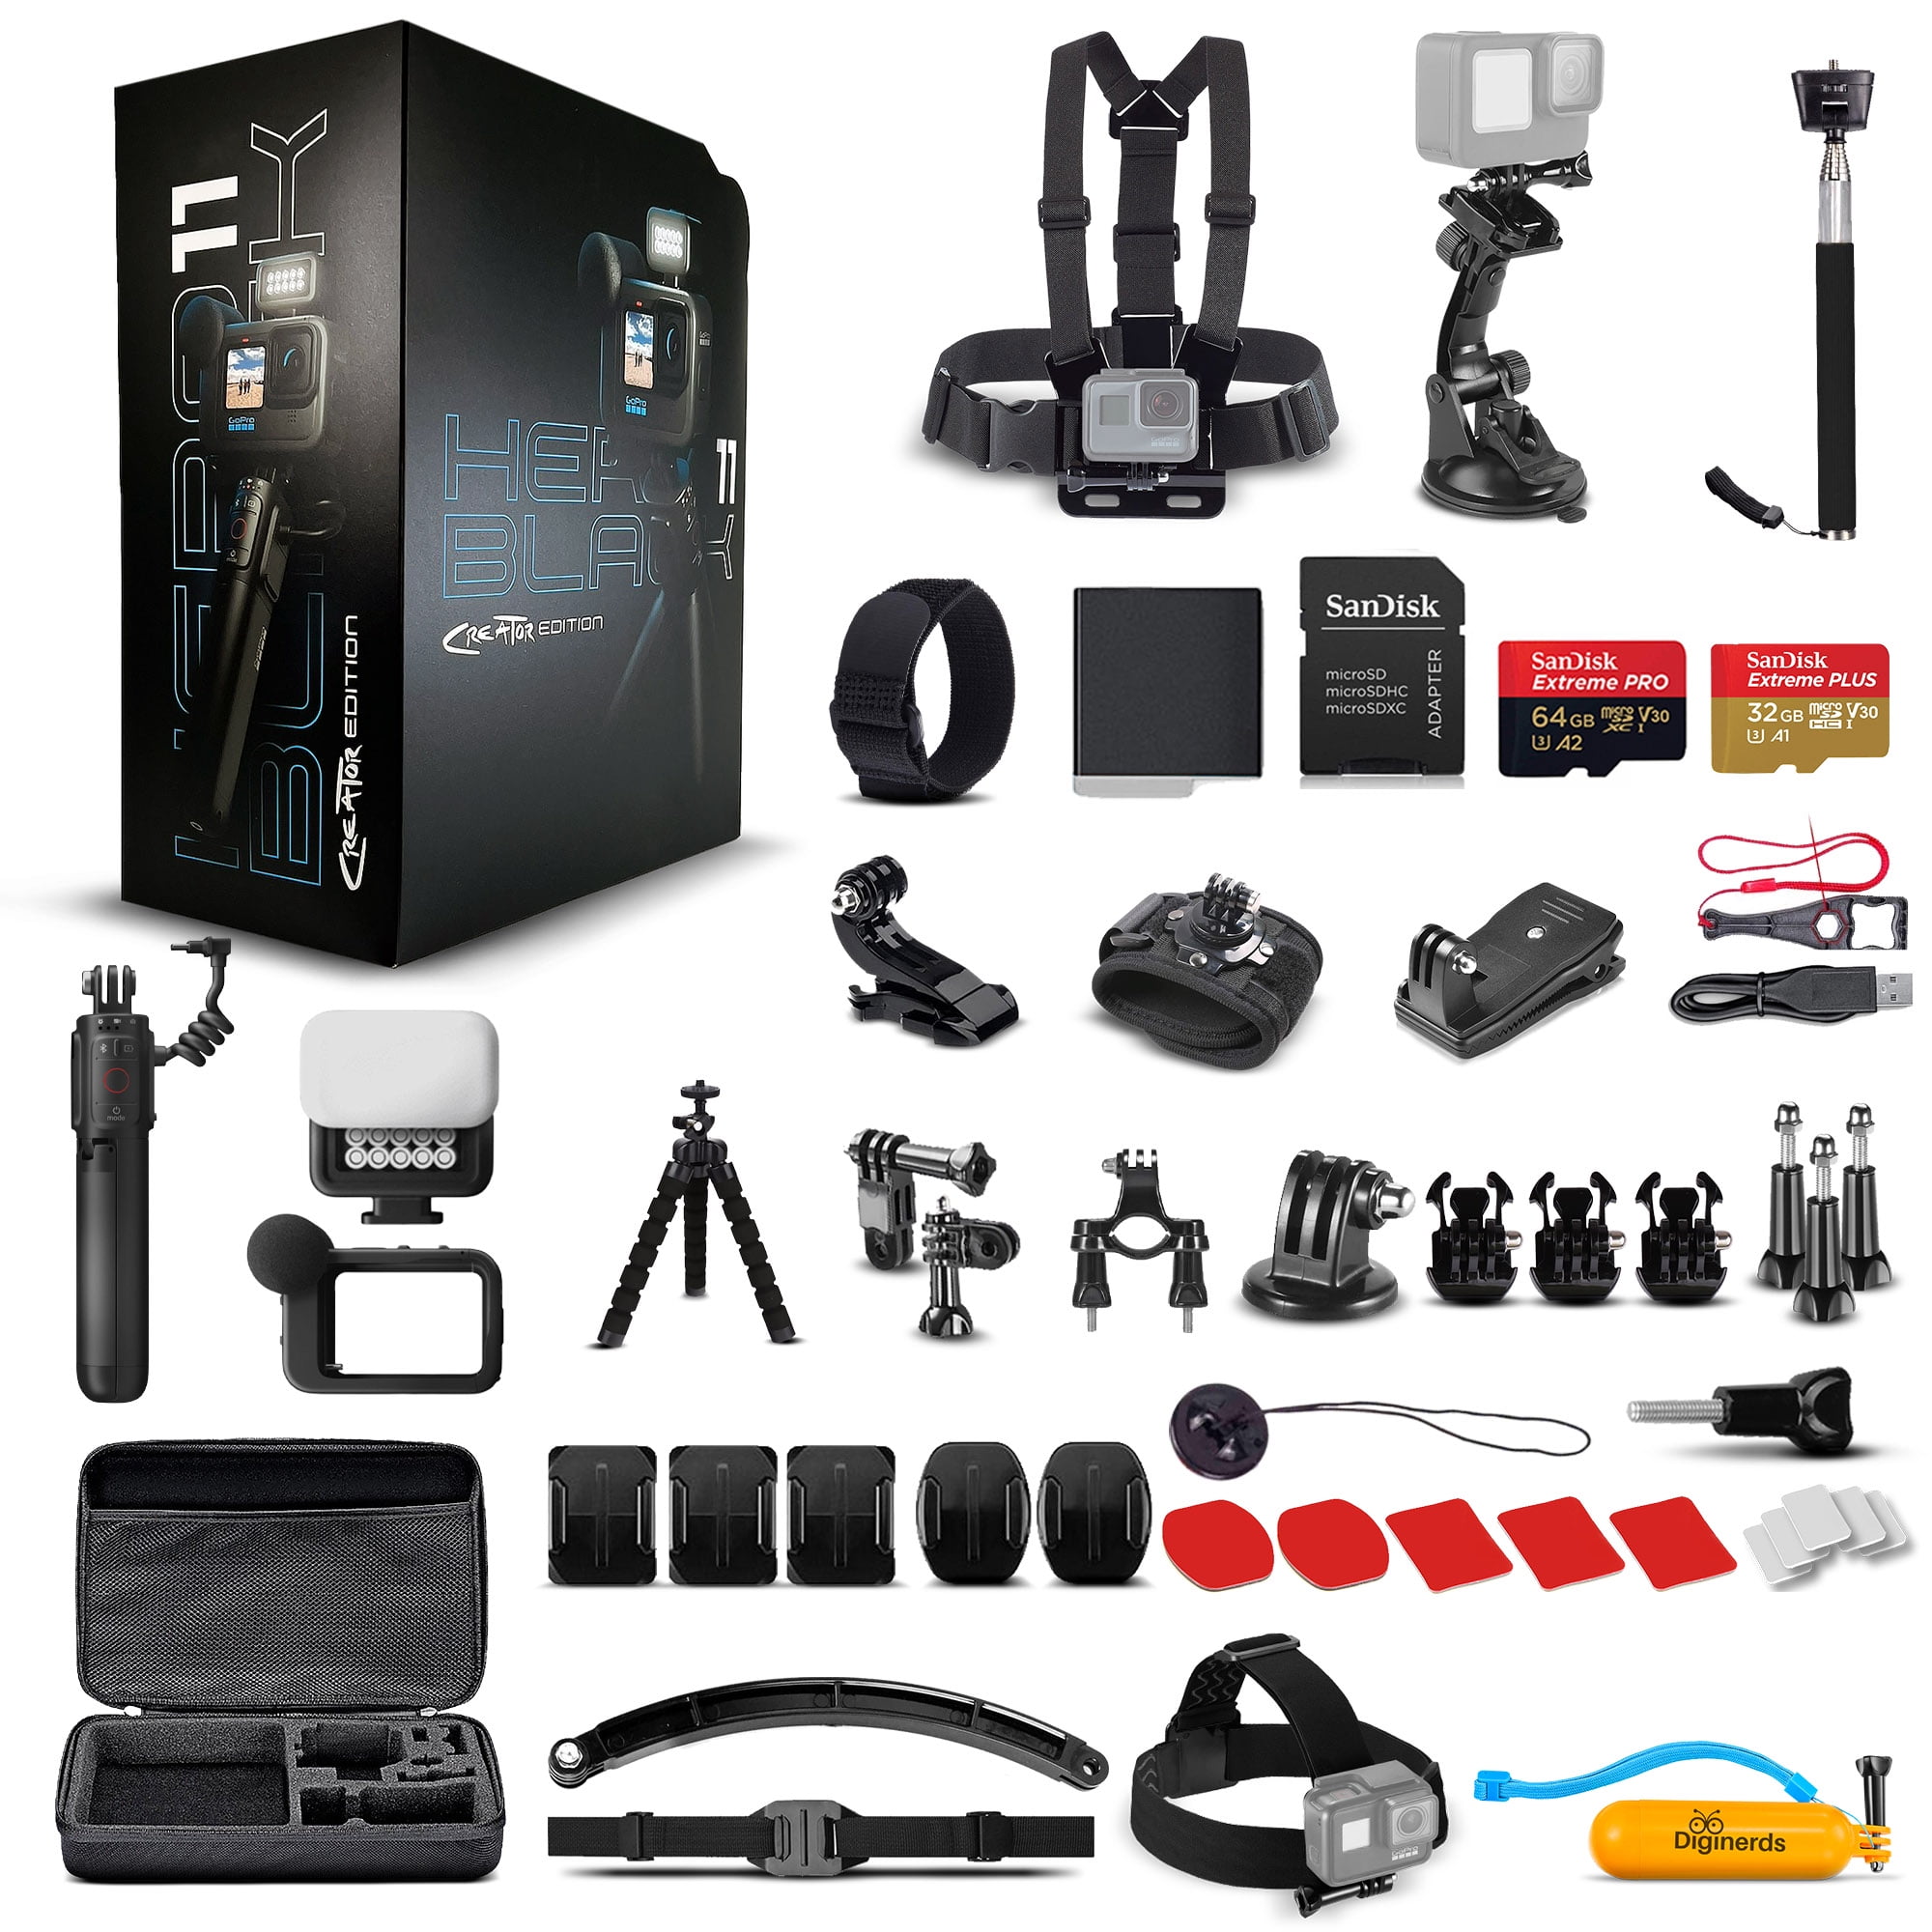 GoPro HERO11 (HERO 11) Black Creator Edition - Includes Volta (Battery  Grip, Tripod, Remote), Media Mod, Light Mod, - Waterproof Action Camera +  64GB Card, 50 Piece Accessory Kit and 2 Extra Batteries